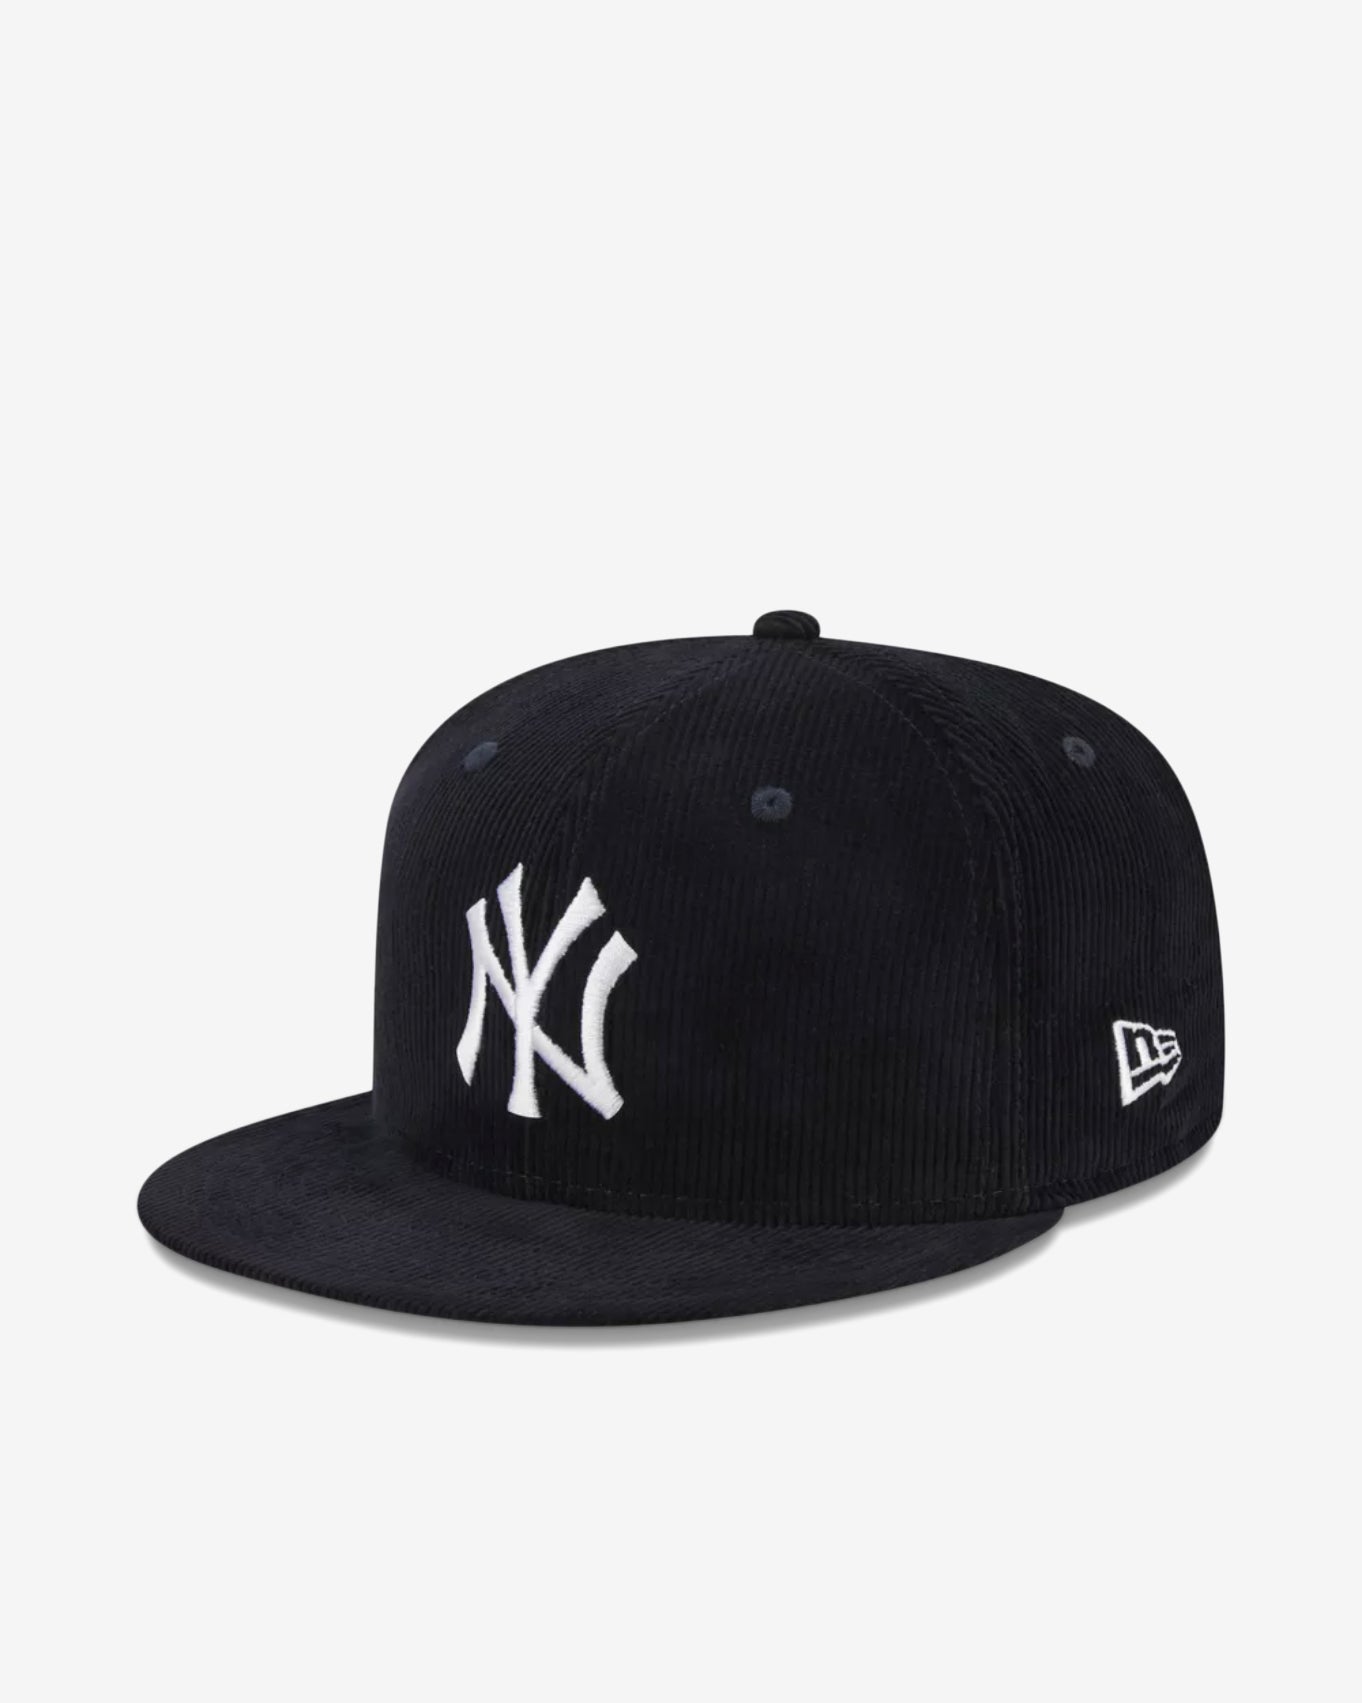 NEW YORK YANKEES THROWBACK CORD 59FIFTY - NAVY